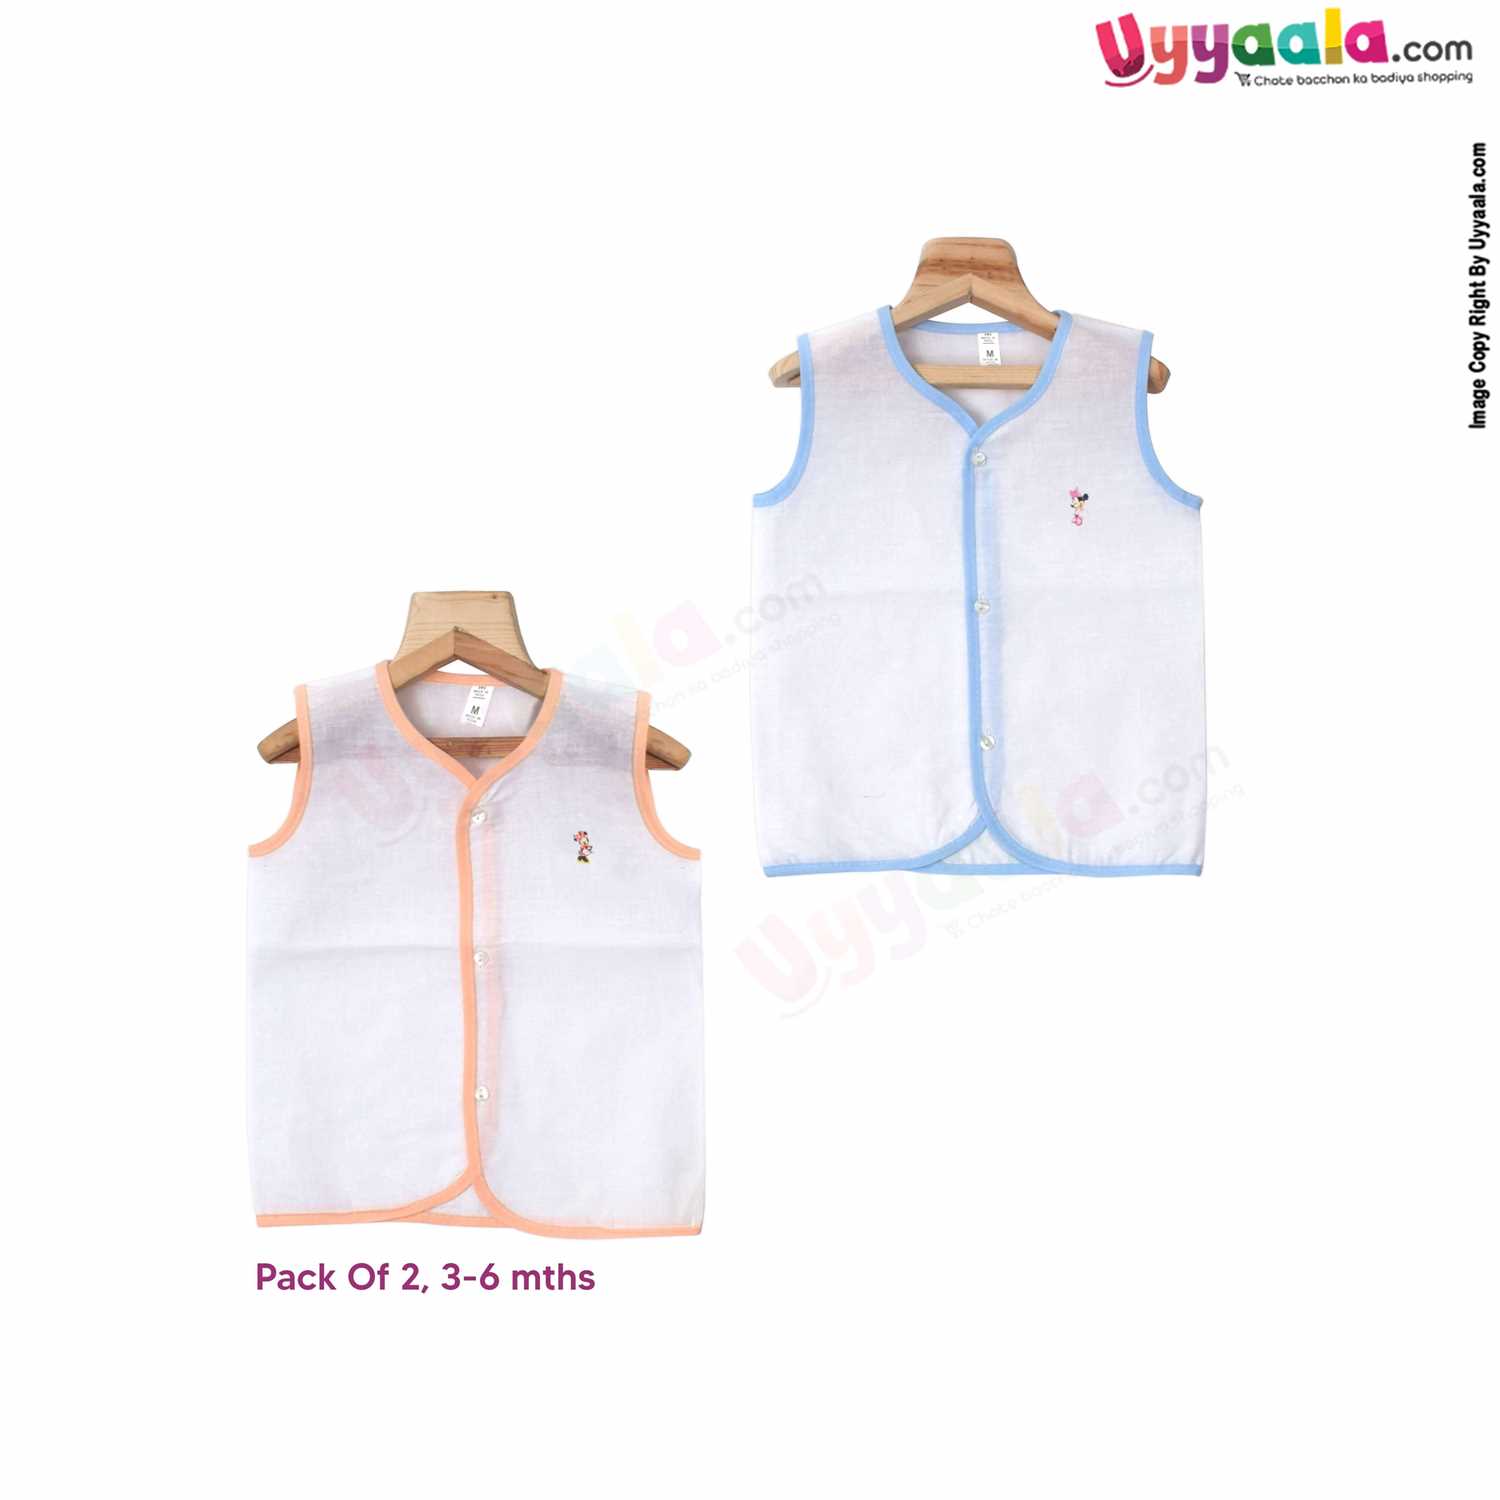 POLAR CUBS Sleeveless Baby Jabla Set, Front Opening Button Model, Premium Quality Cotton Baby Wear, (3-6M), 2Pack - White with Blue & Orange Borders